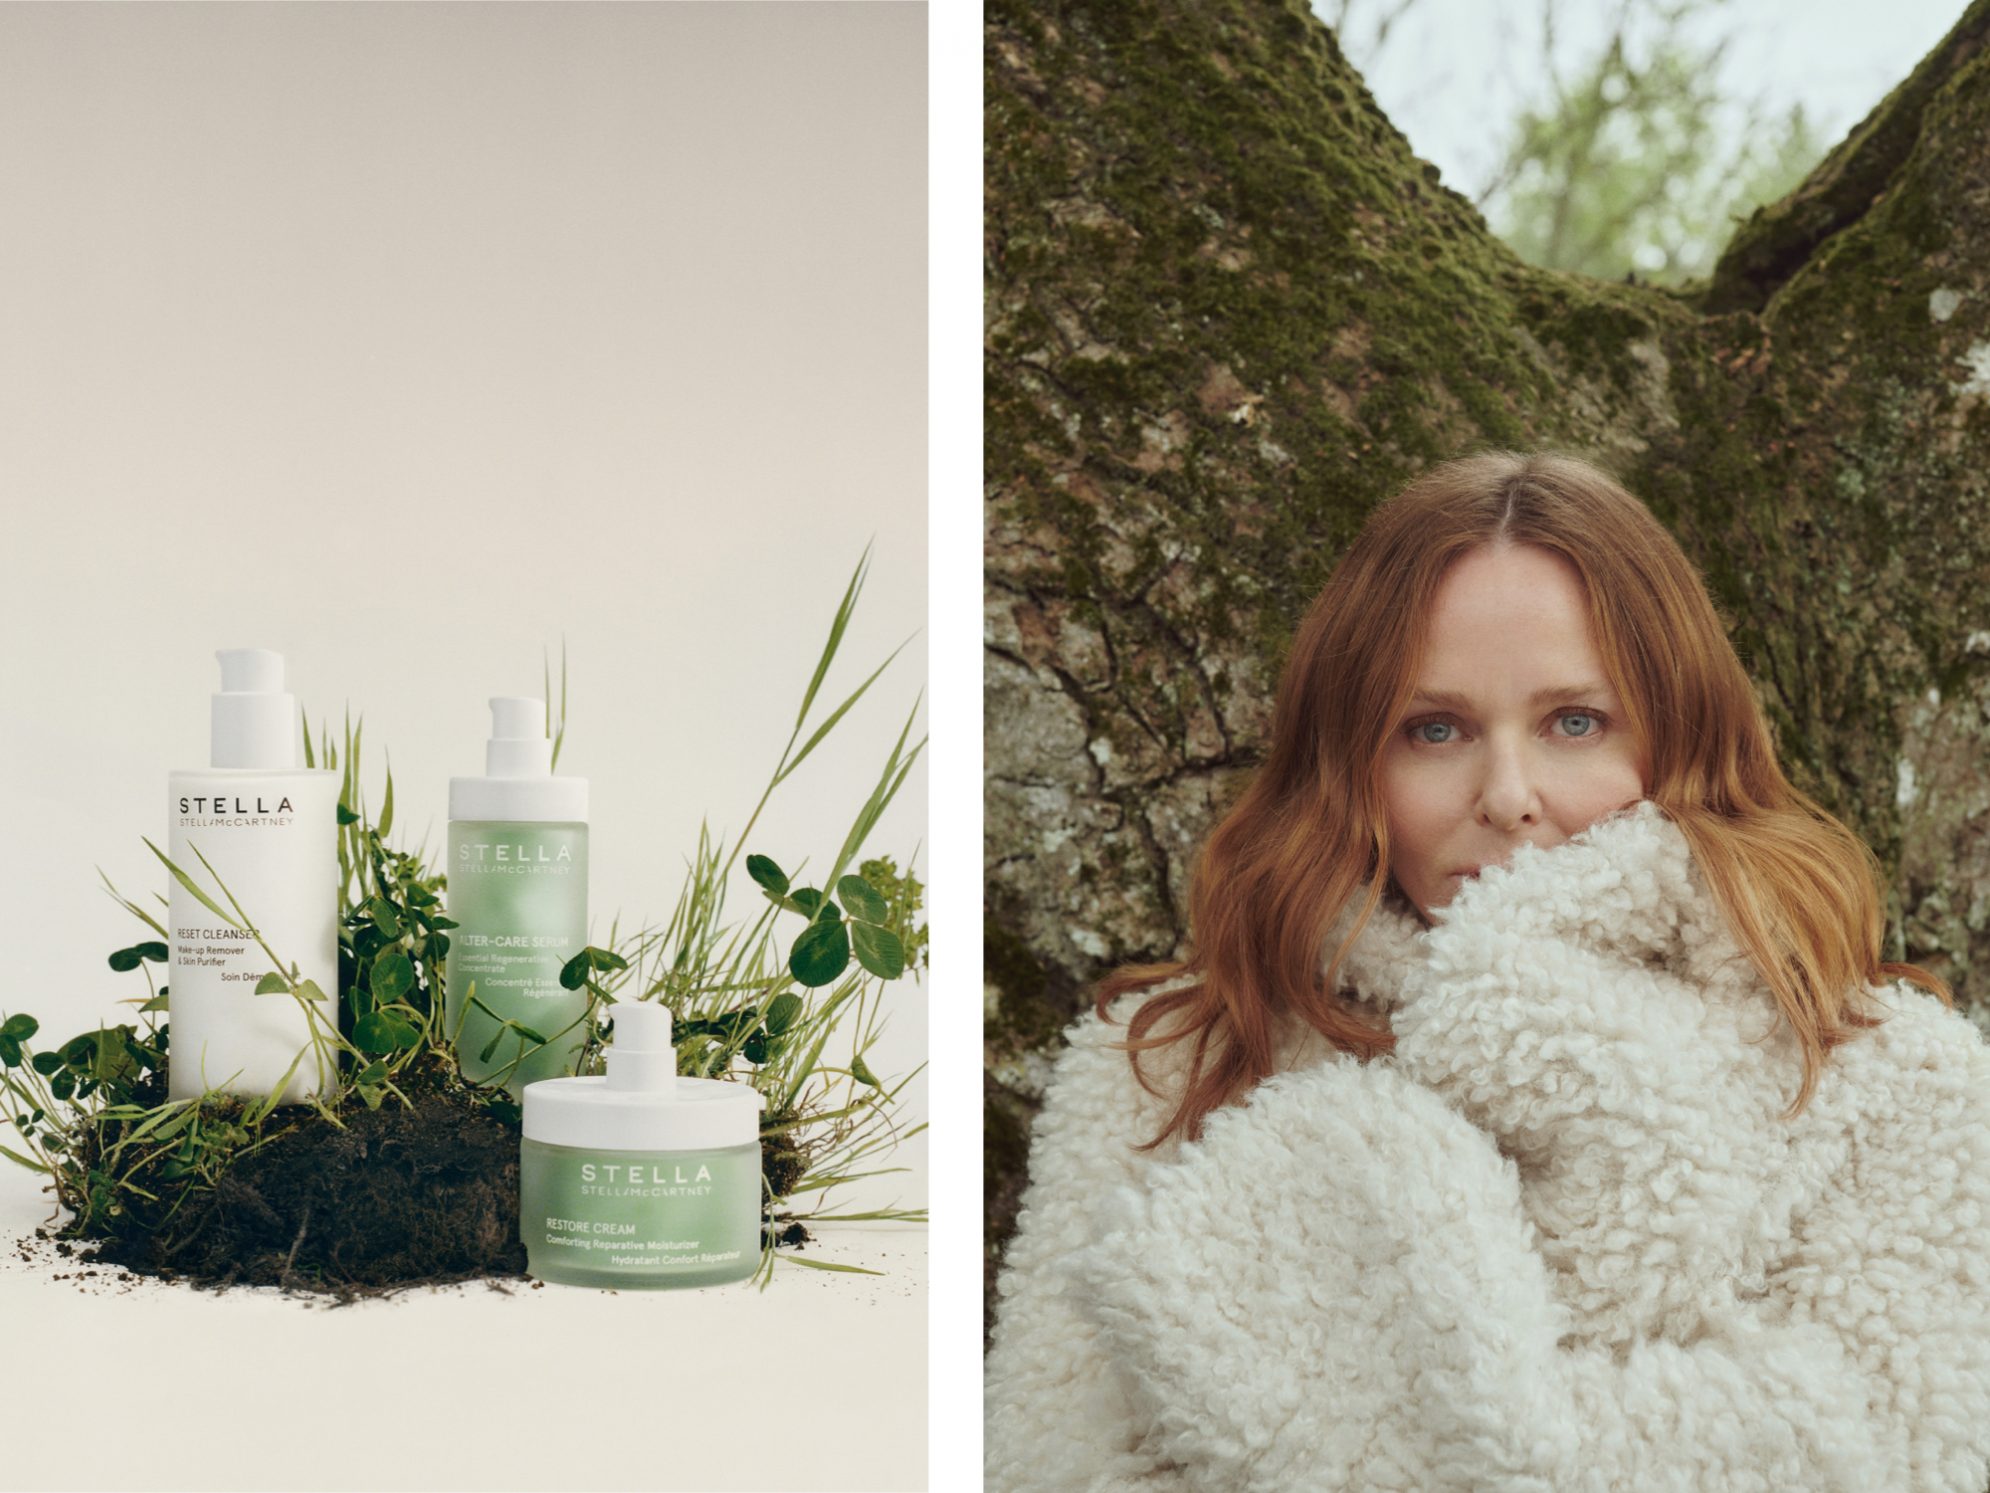 Stella by Stella McCartney Skincare Launches: Is It Really